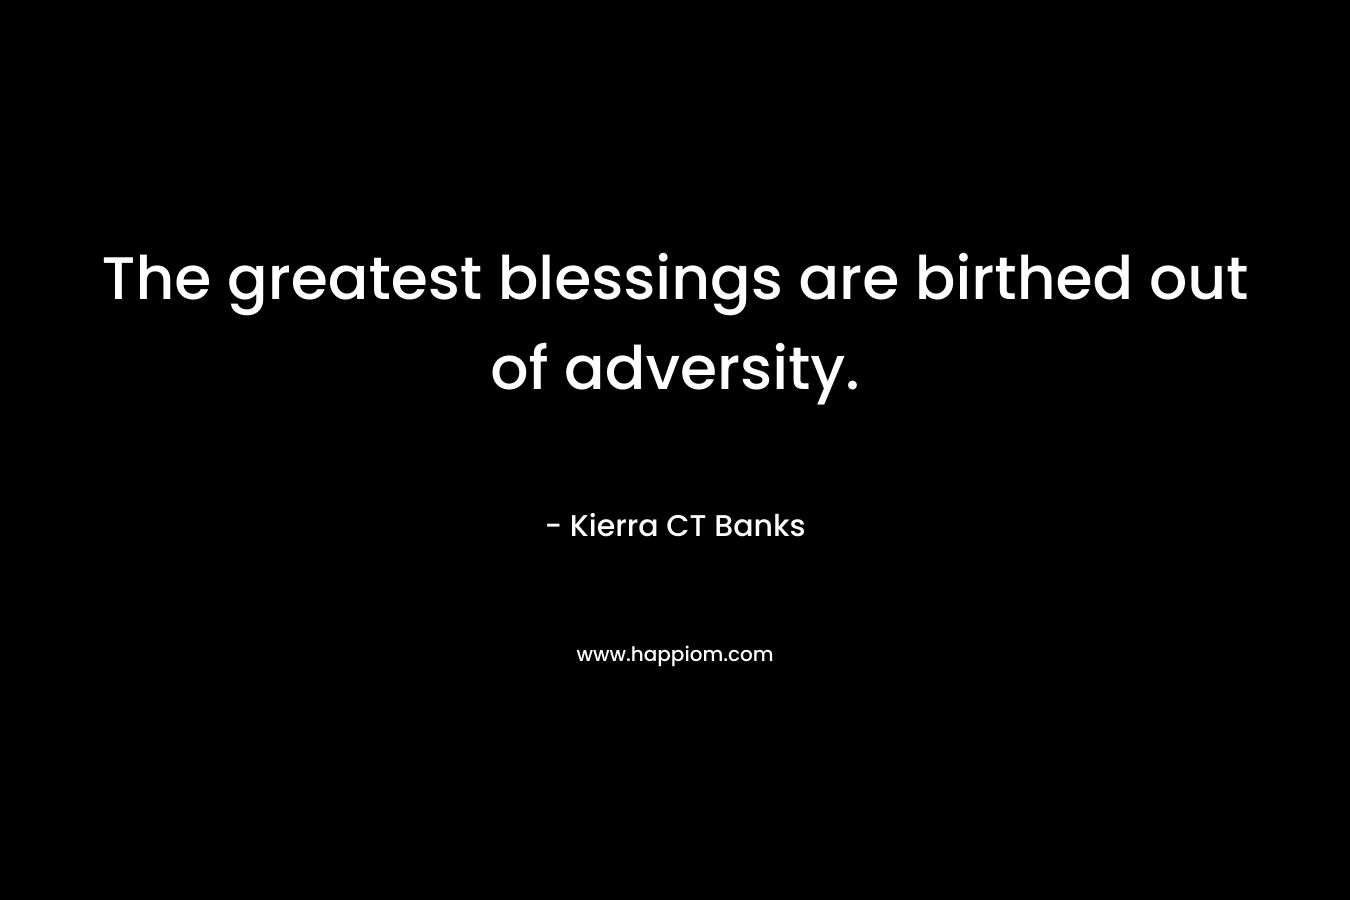 The greatest blessings are birthed out of adversity.